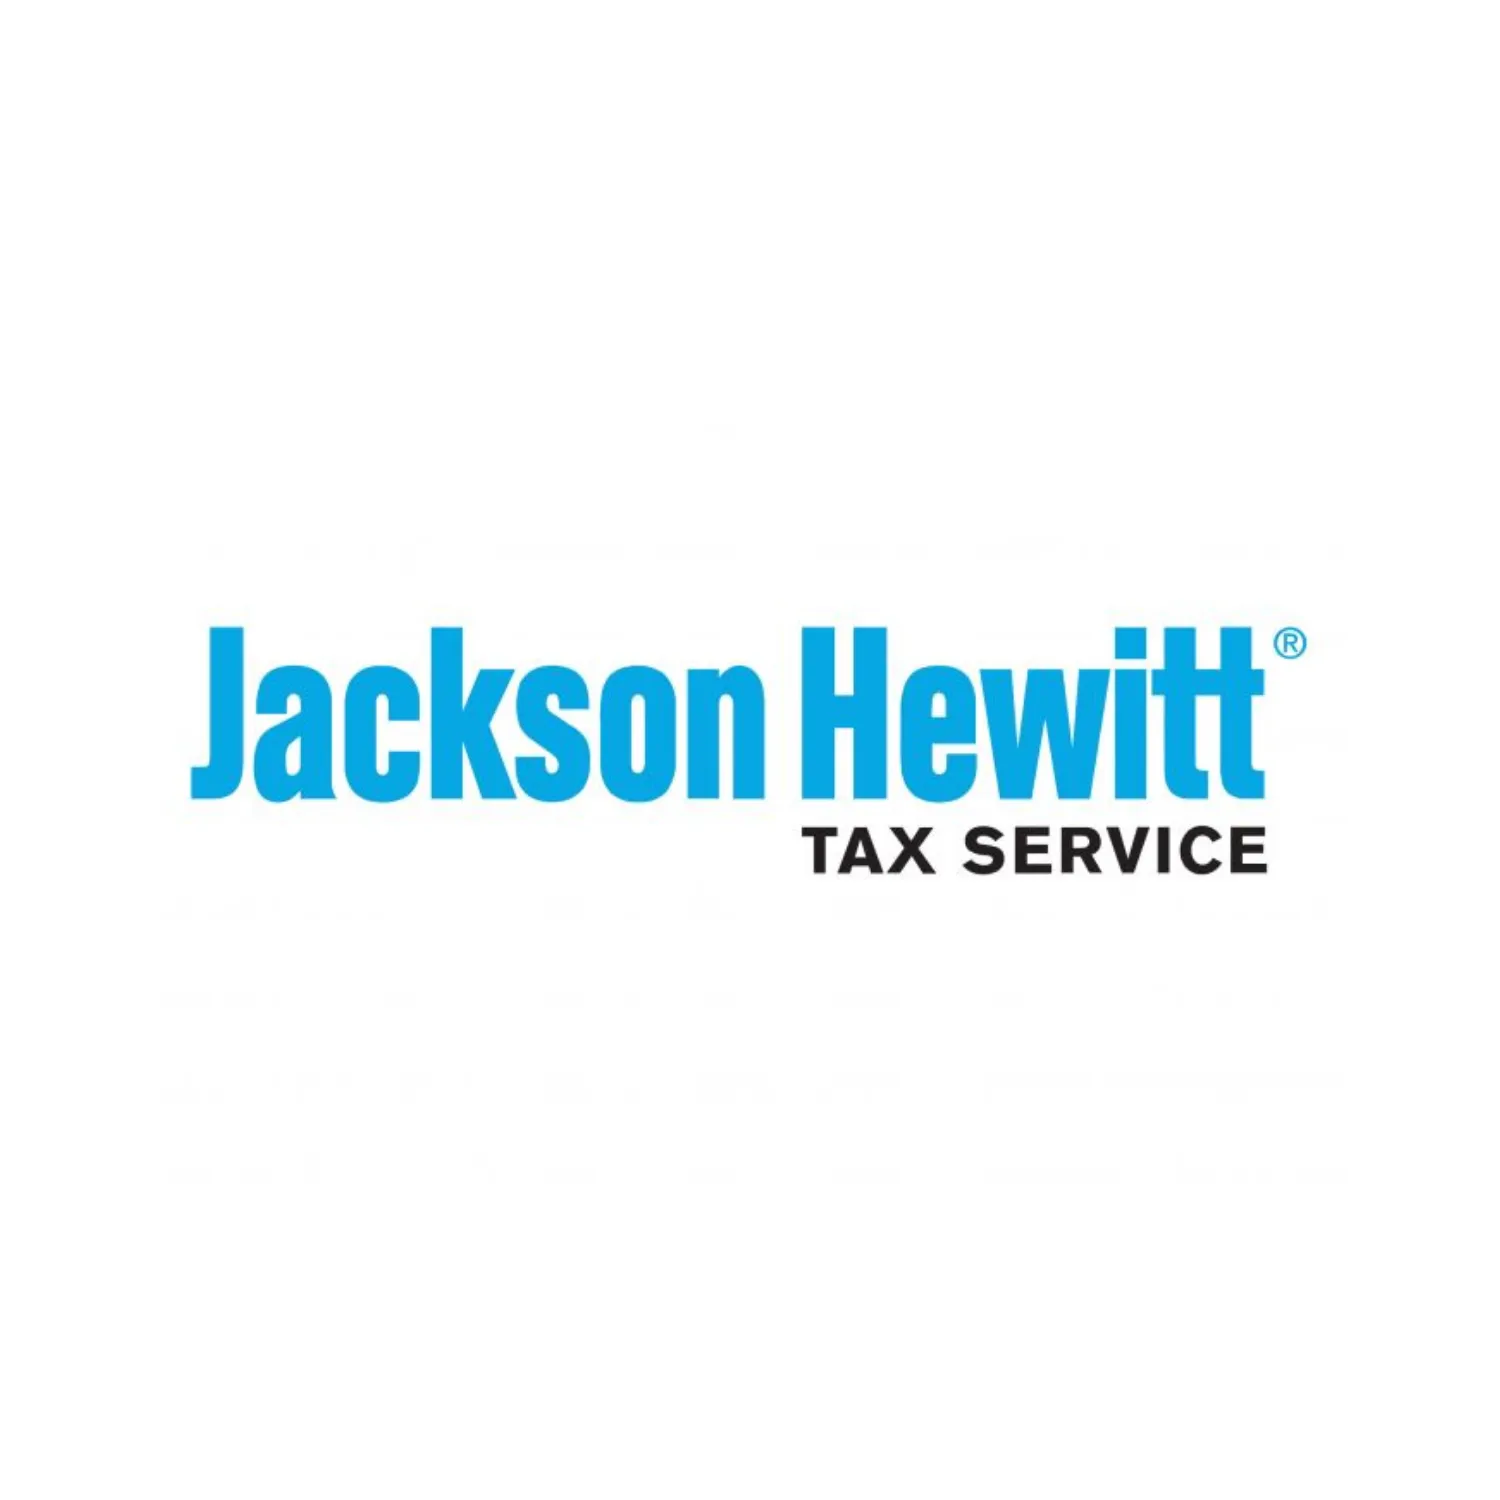 Database of Jackson Hewitt Tax Service Locations in the United States